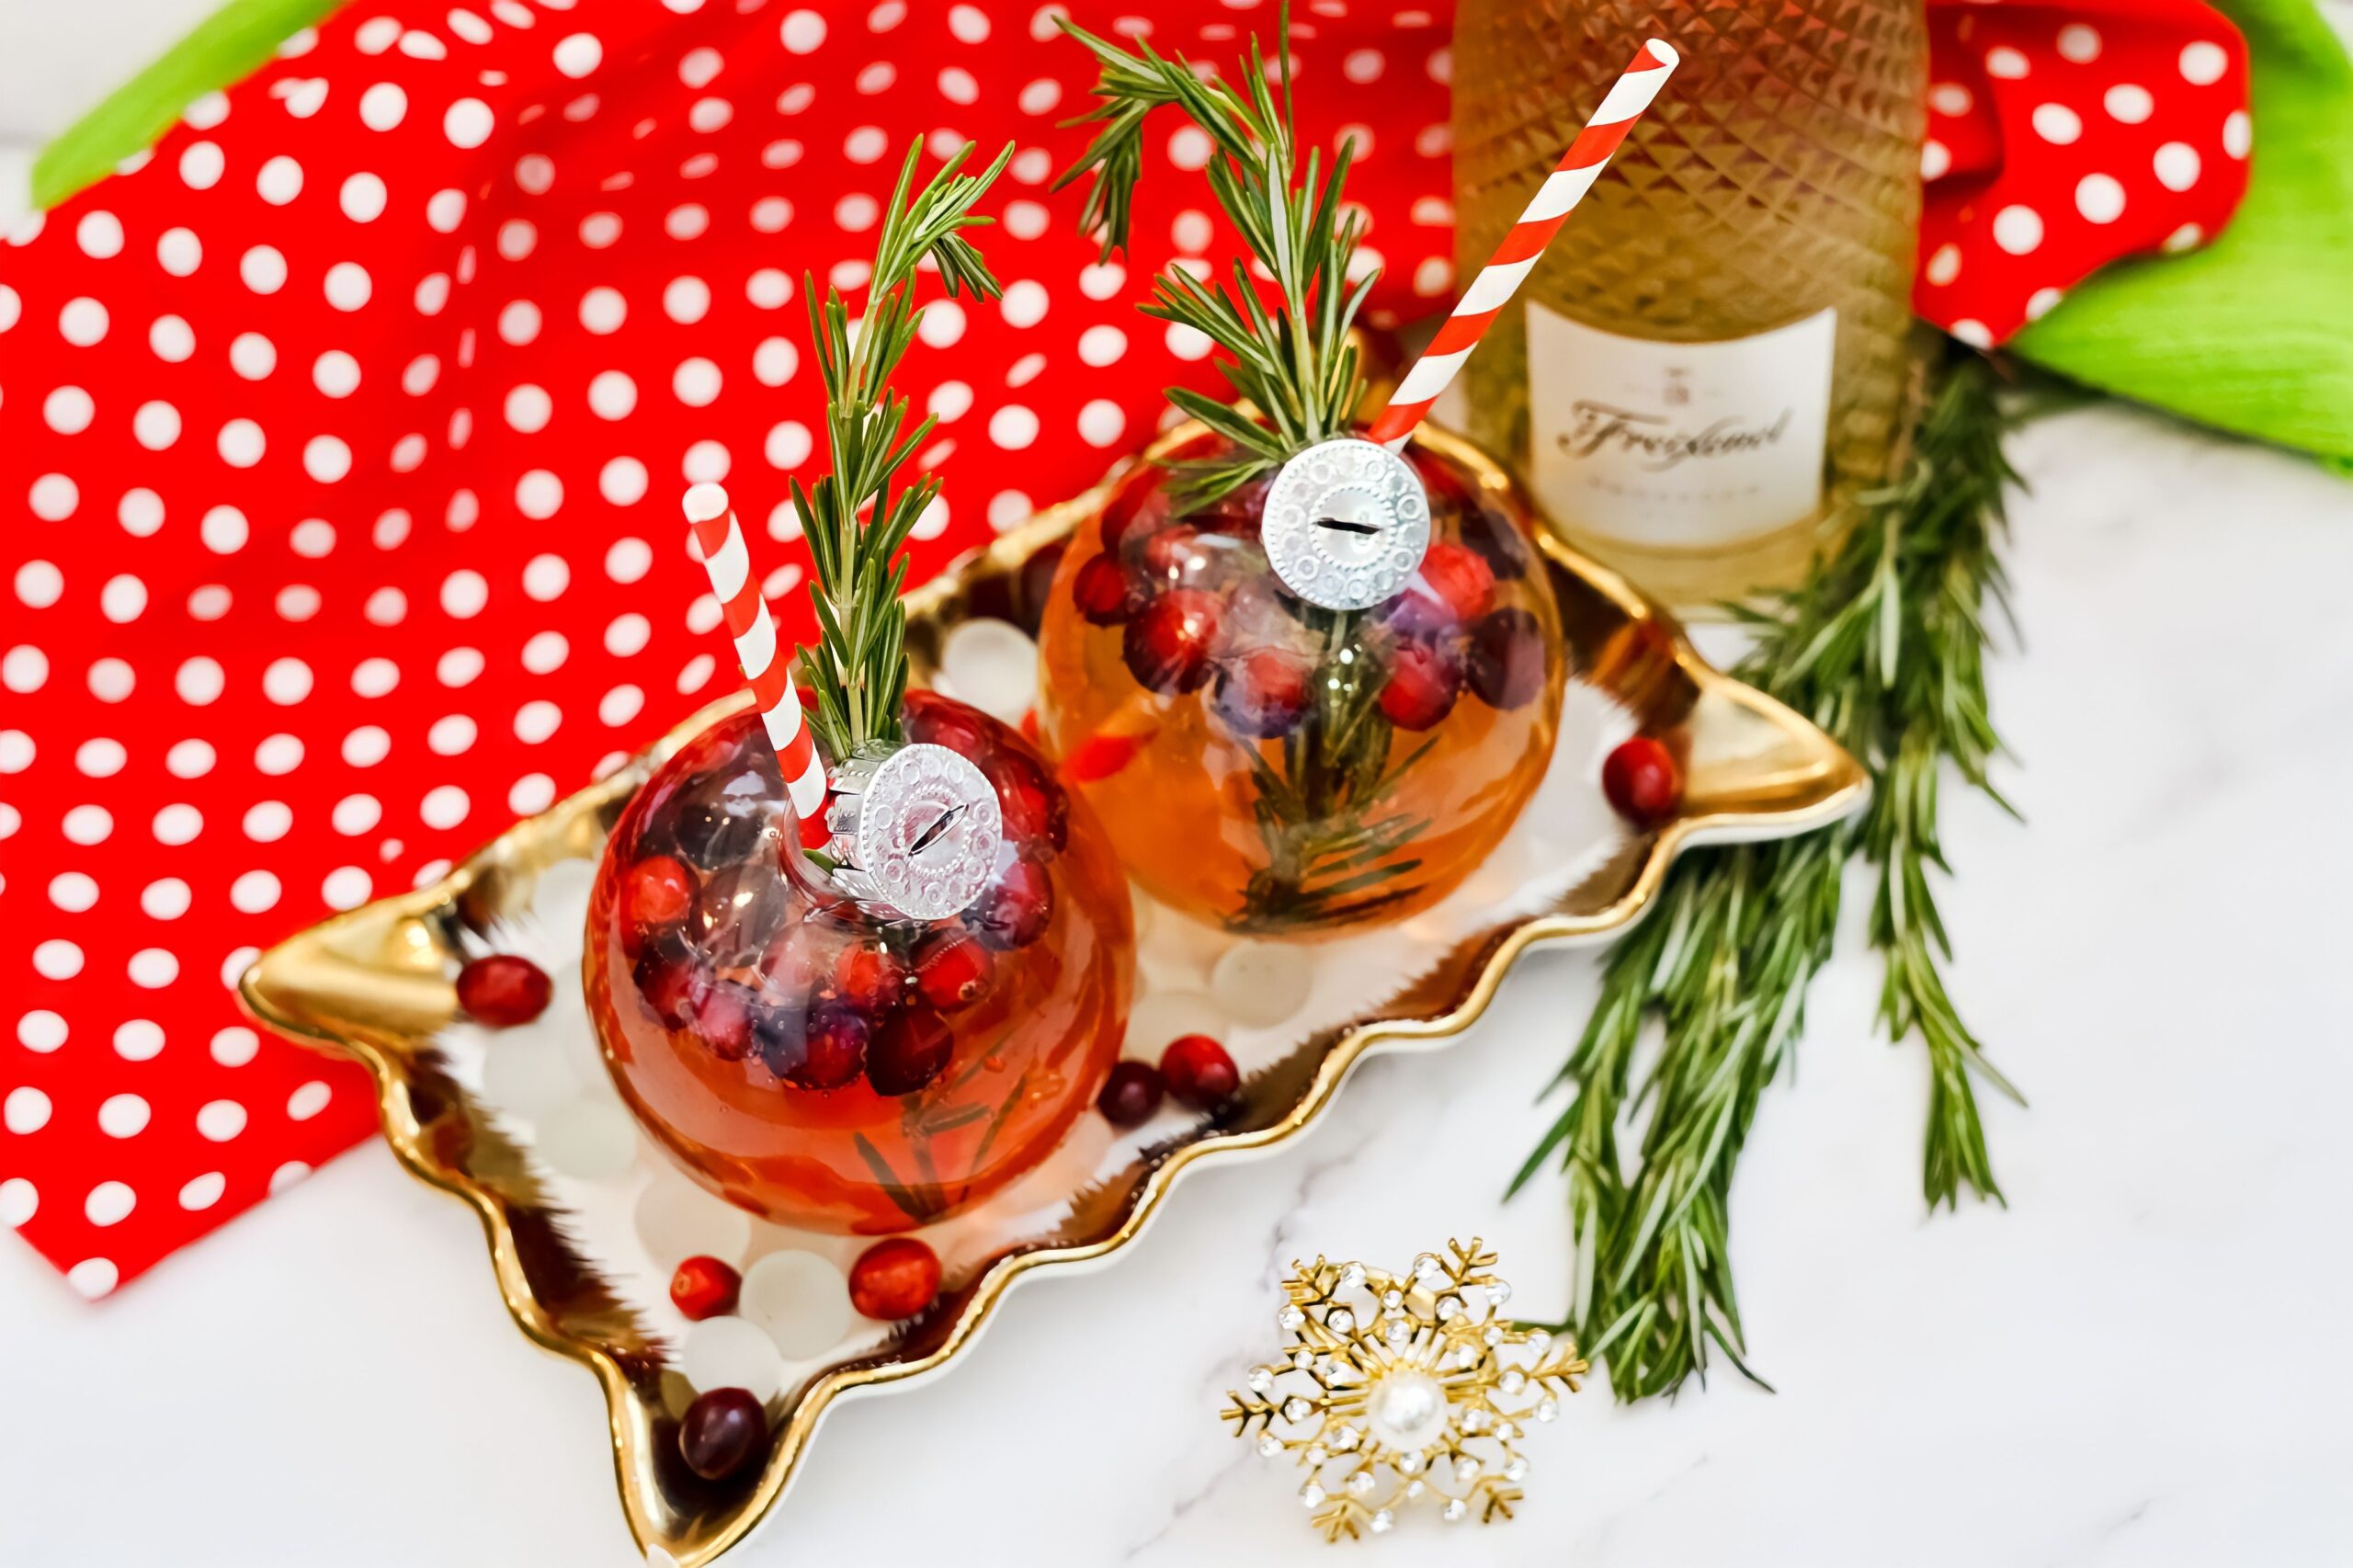 Add some sparkle to your holiday with our Cranberry Mimosa Ball Ornament Recipe